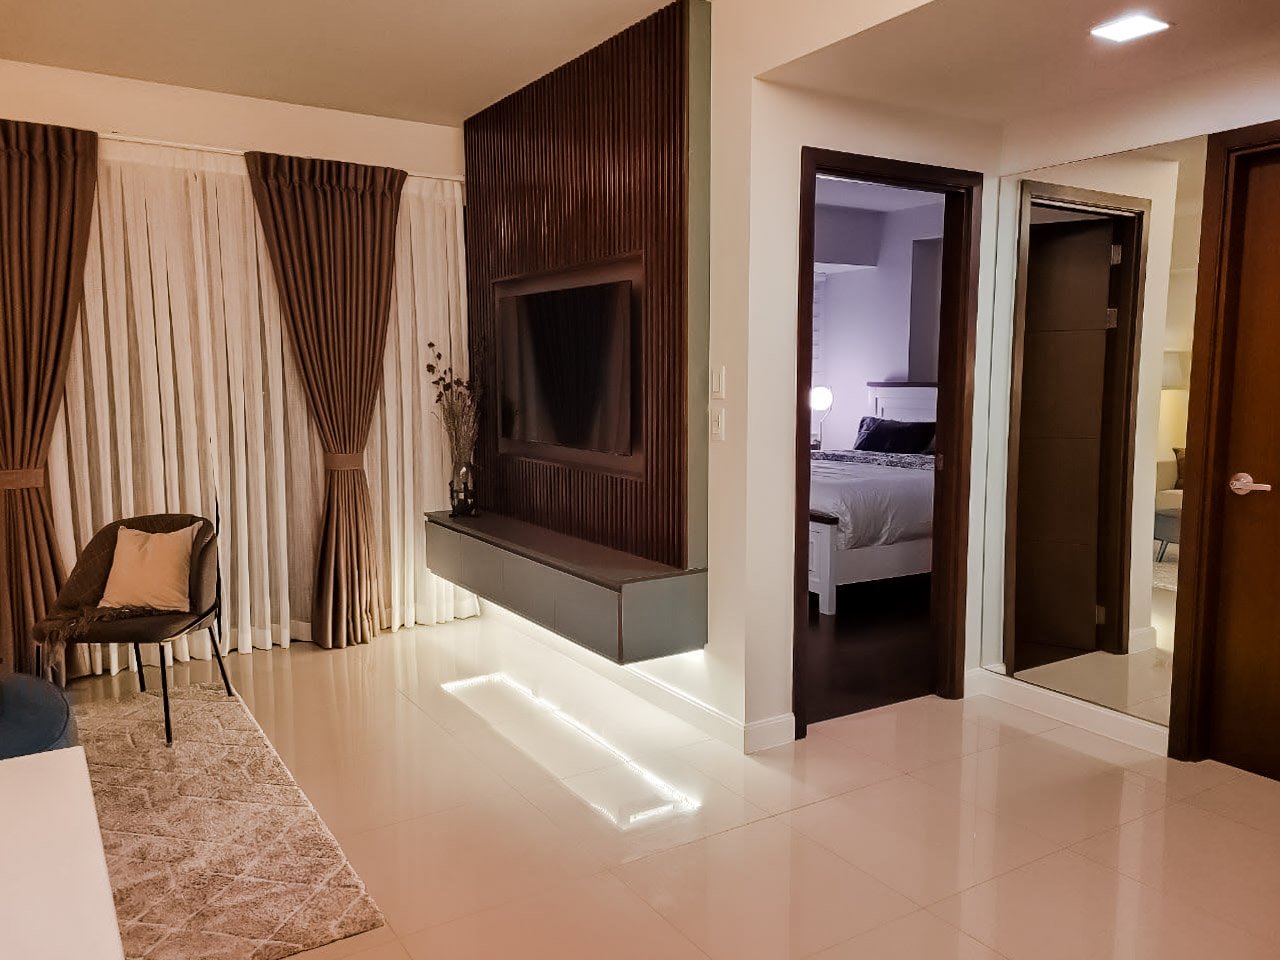 RCALC14 Furnished 1 Bedroom Condo for Rent in Cebu Business Park - 4